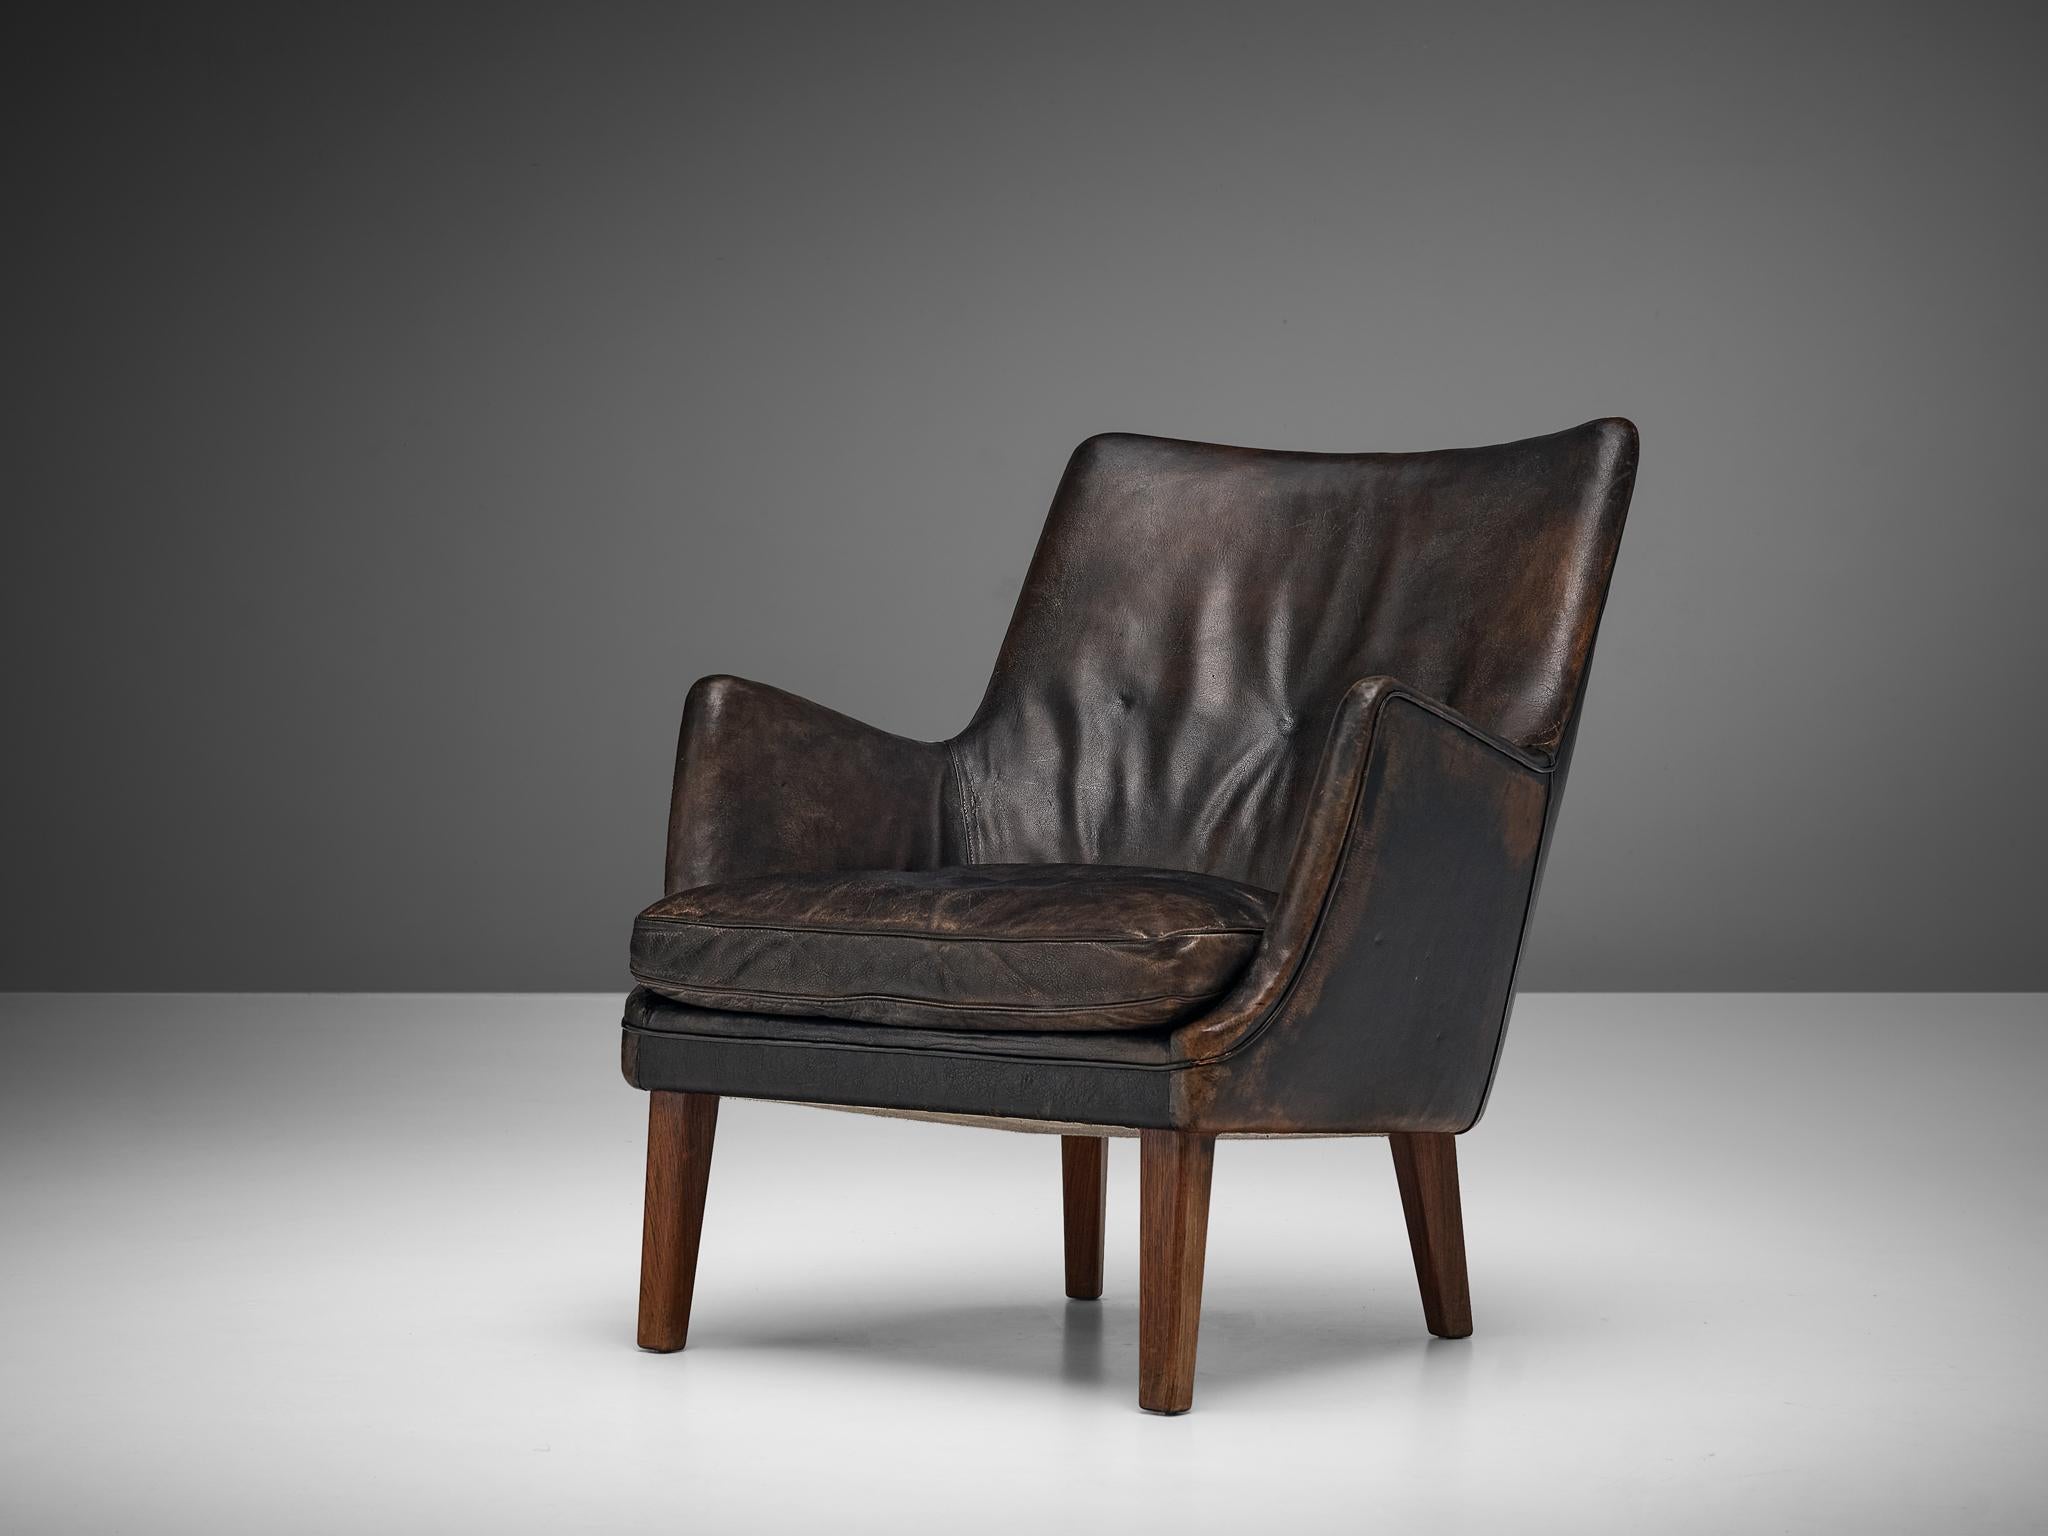 Arne Vodder for Ivan Schlechter, lounge chair, leather, wood, Denmark, 1953

Distinct design by Arne Vodder in 1953. The shape of the lounge chair is created by the high, slanted backrest with rounded armrests. A seating cushion provides comfort.